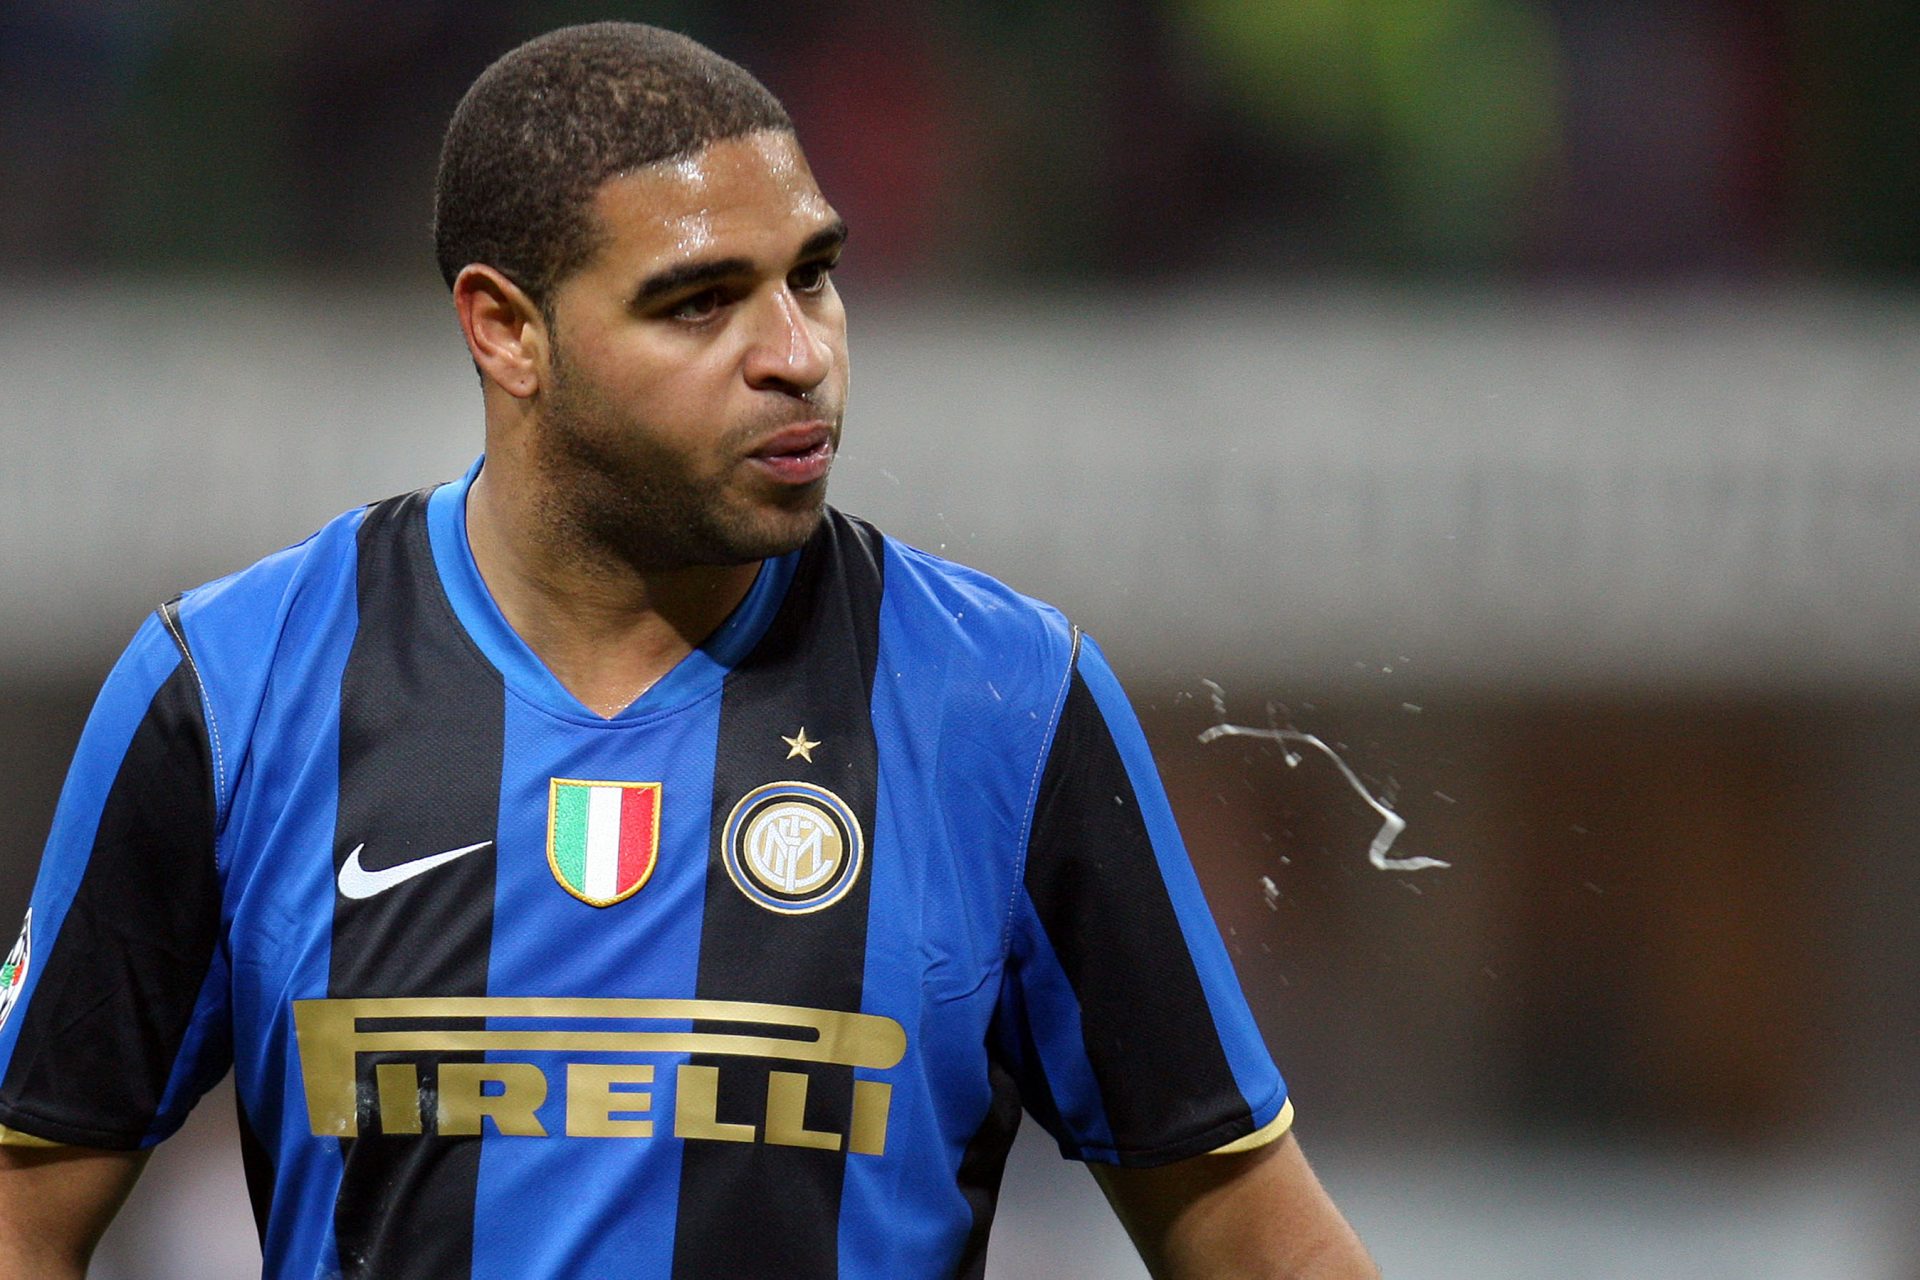 <p><span>However, despite his impressive performances on the pitch, Adriano started to face some serious personal issues. The loss of his father in 2004 upset him deeply, and he started having issues with alcohol. </span></p>